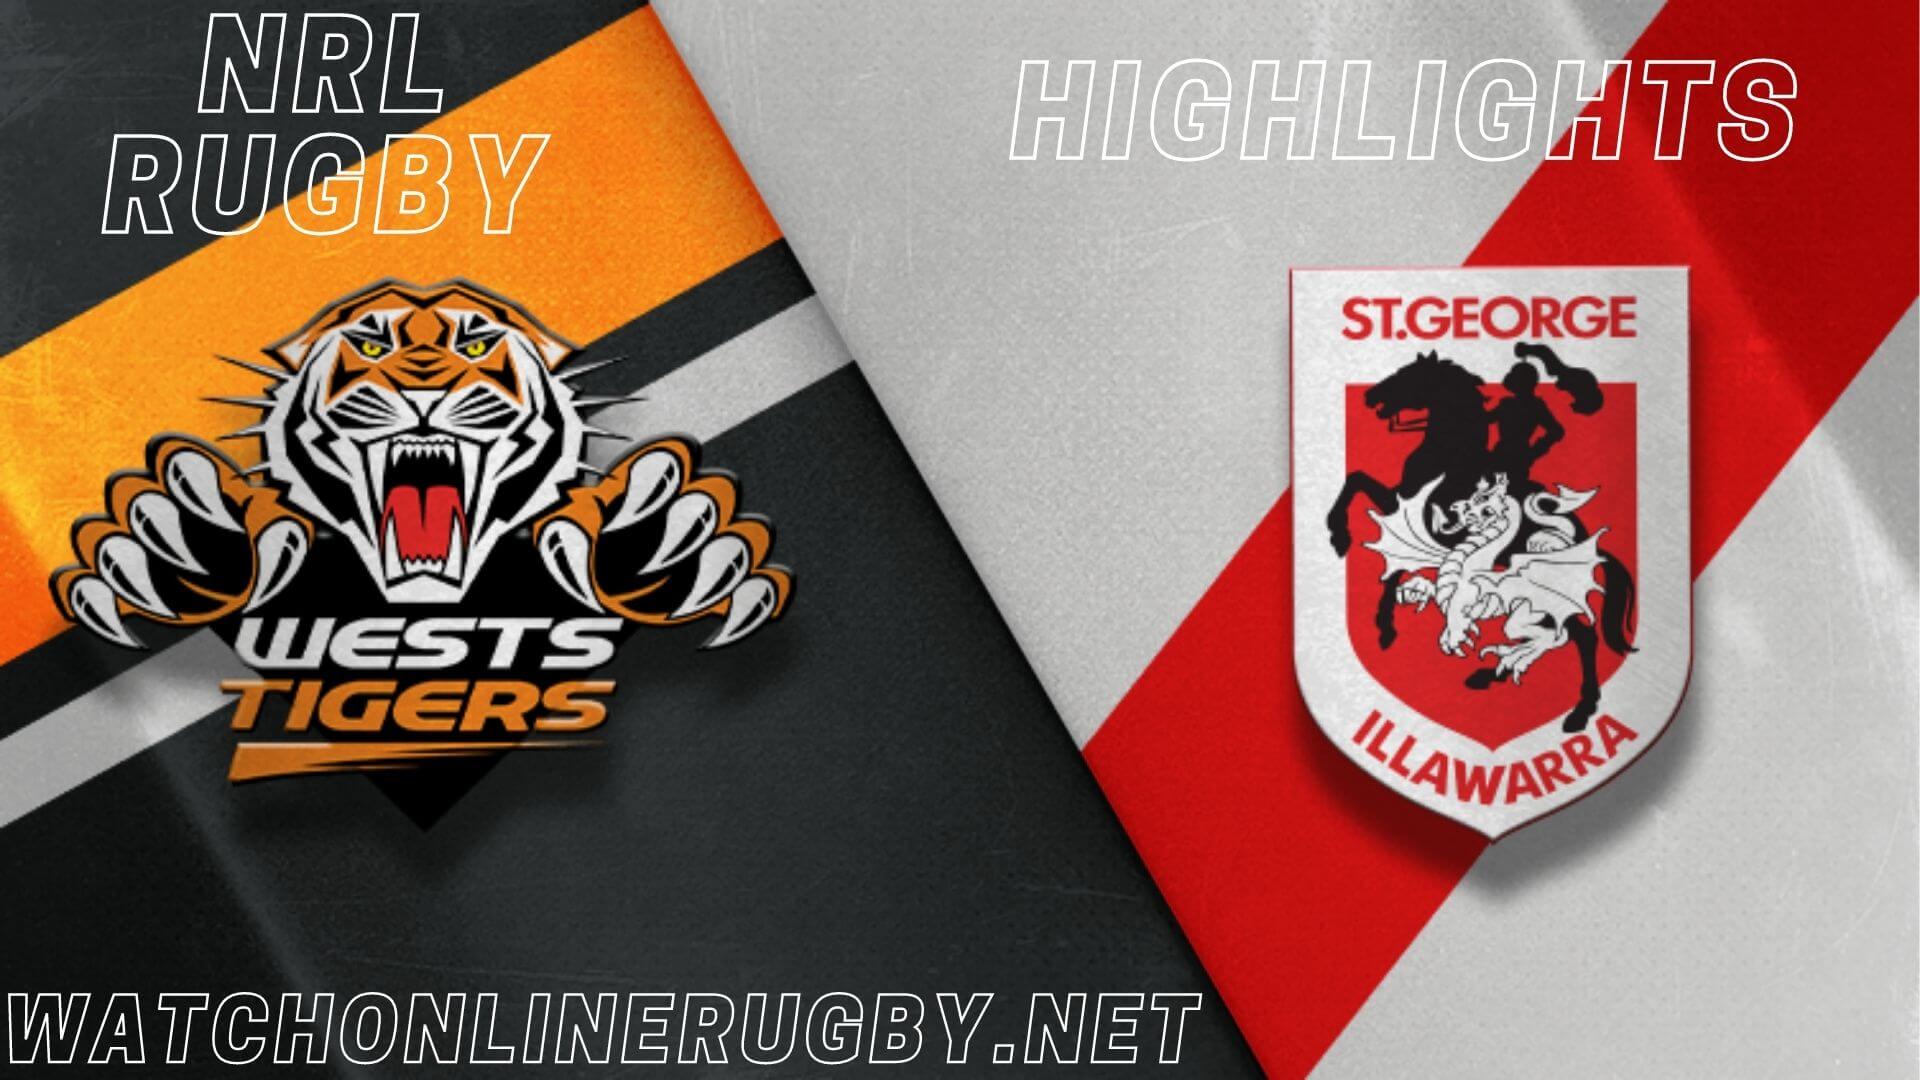 Wests Tigers Vs Dragons Highlights RD 24 NRL Rugby